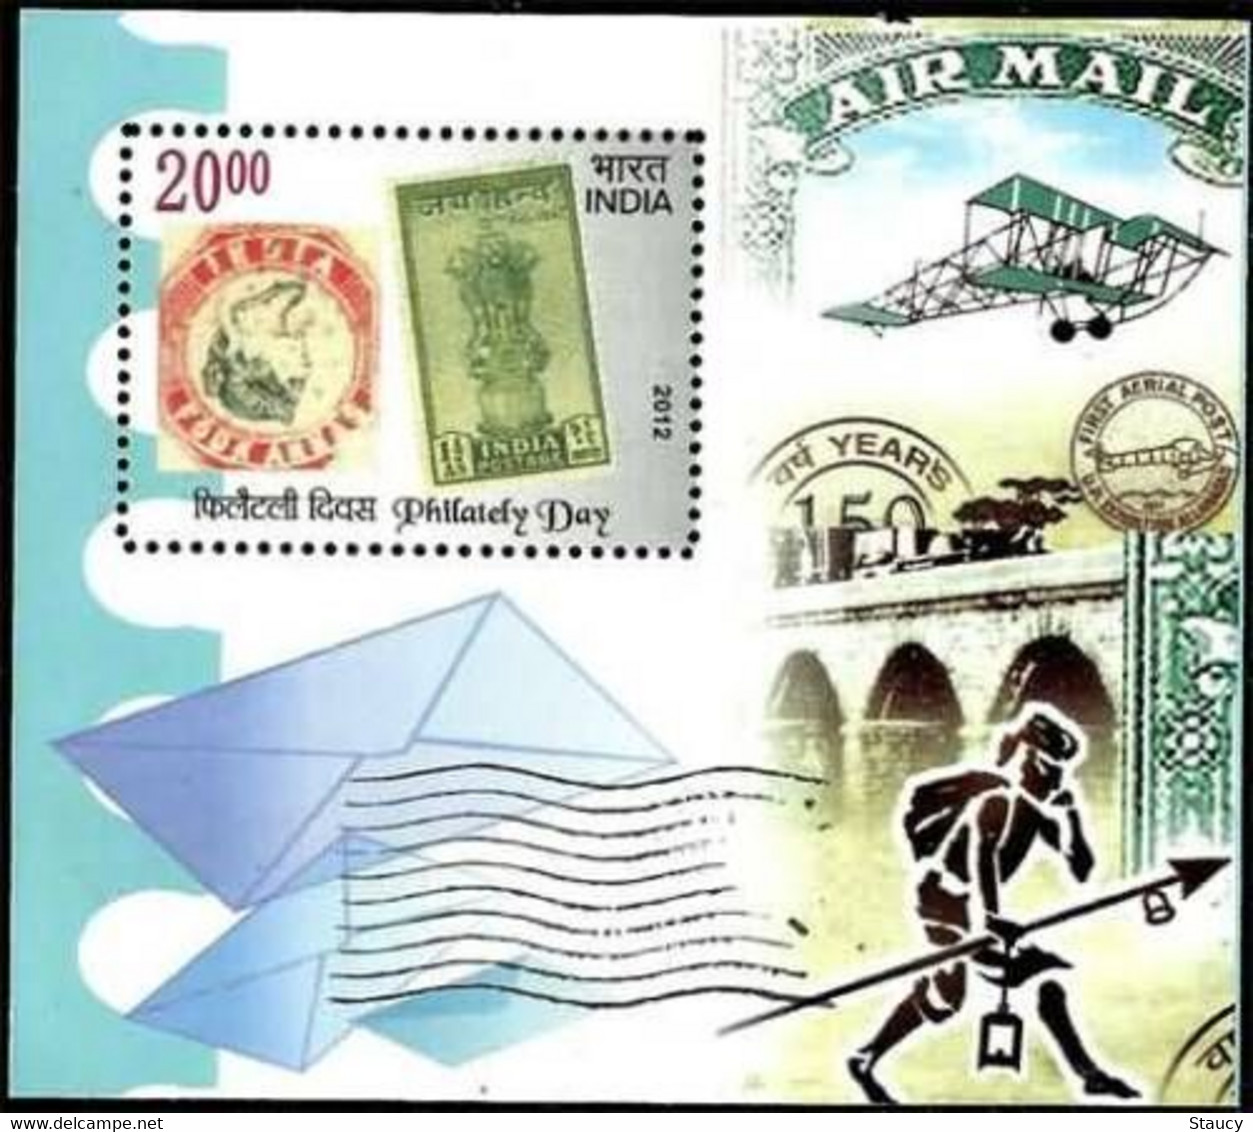 India 2012 Full Set Of Miniature Sheets 6v Lighthouse Olympics Aviation Dargah MS MNH As Per Scan - Spatzen